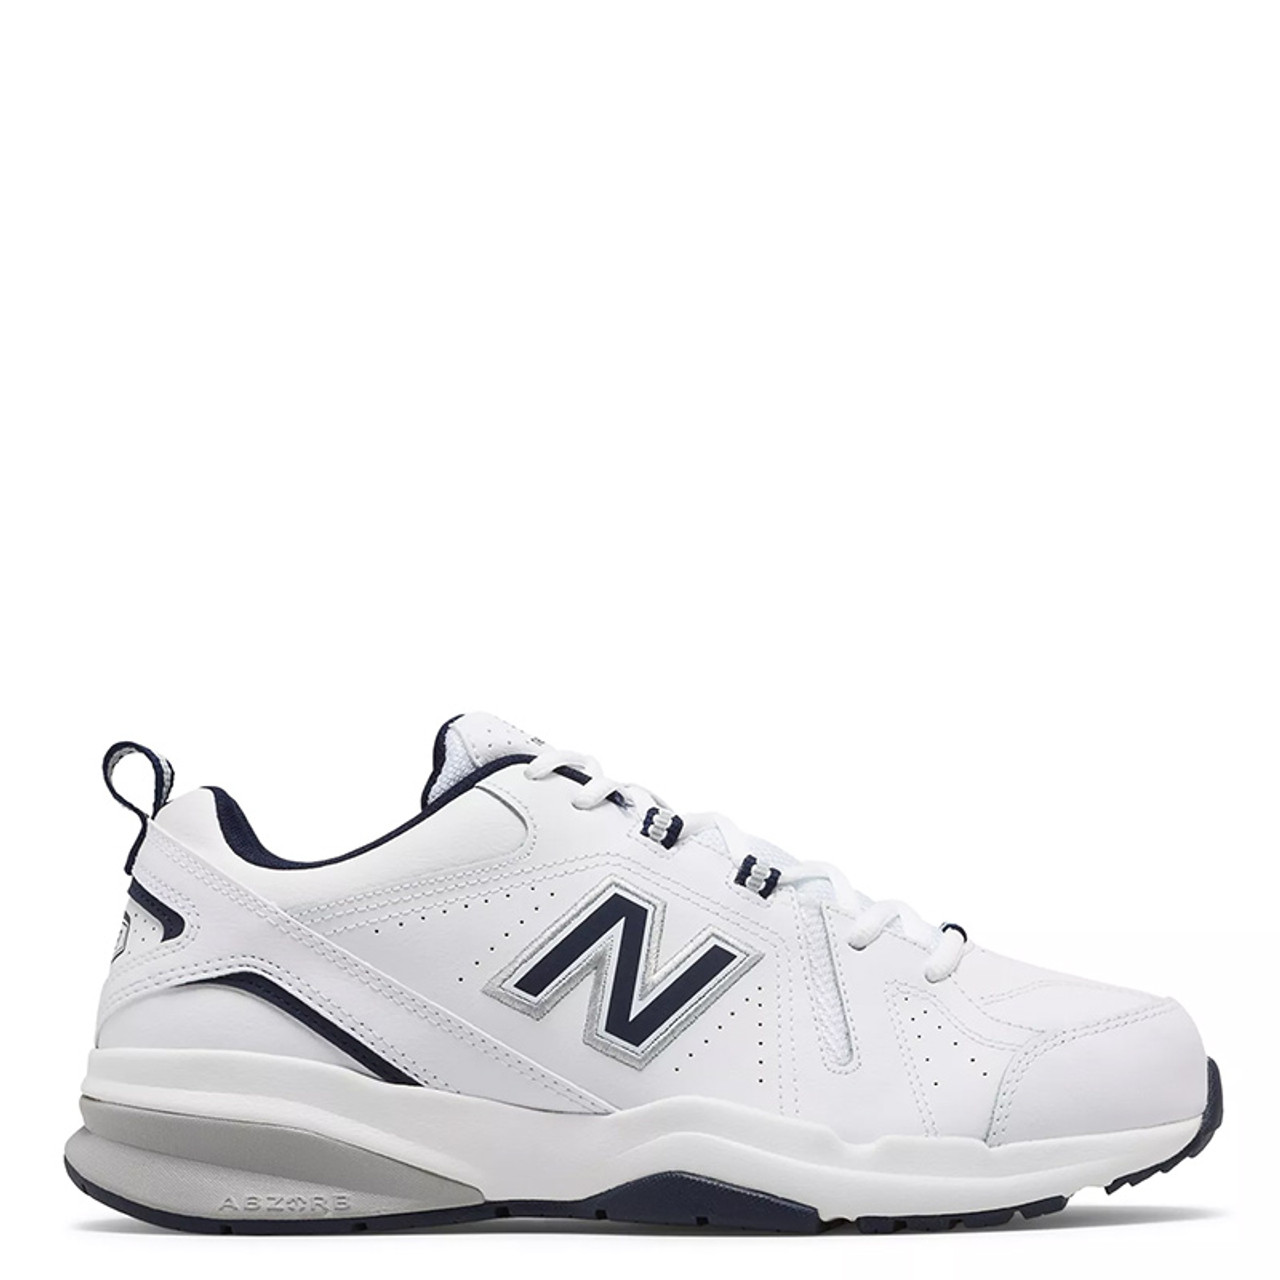 New Balance 608V5 Men's Classic White with Navy Leather Trainers ...